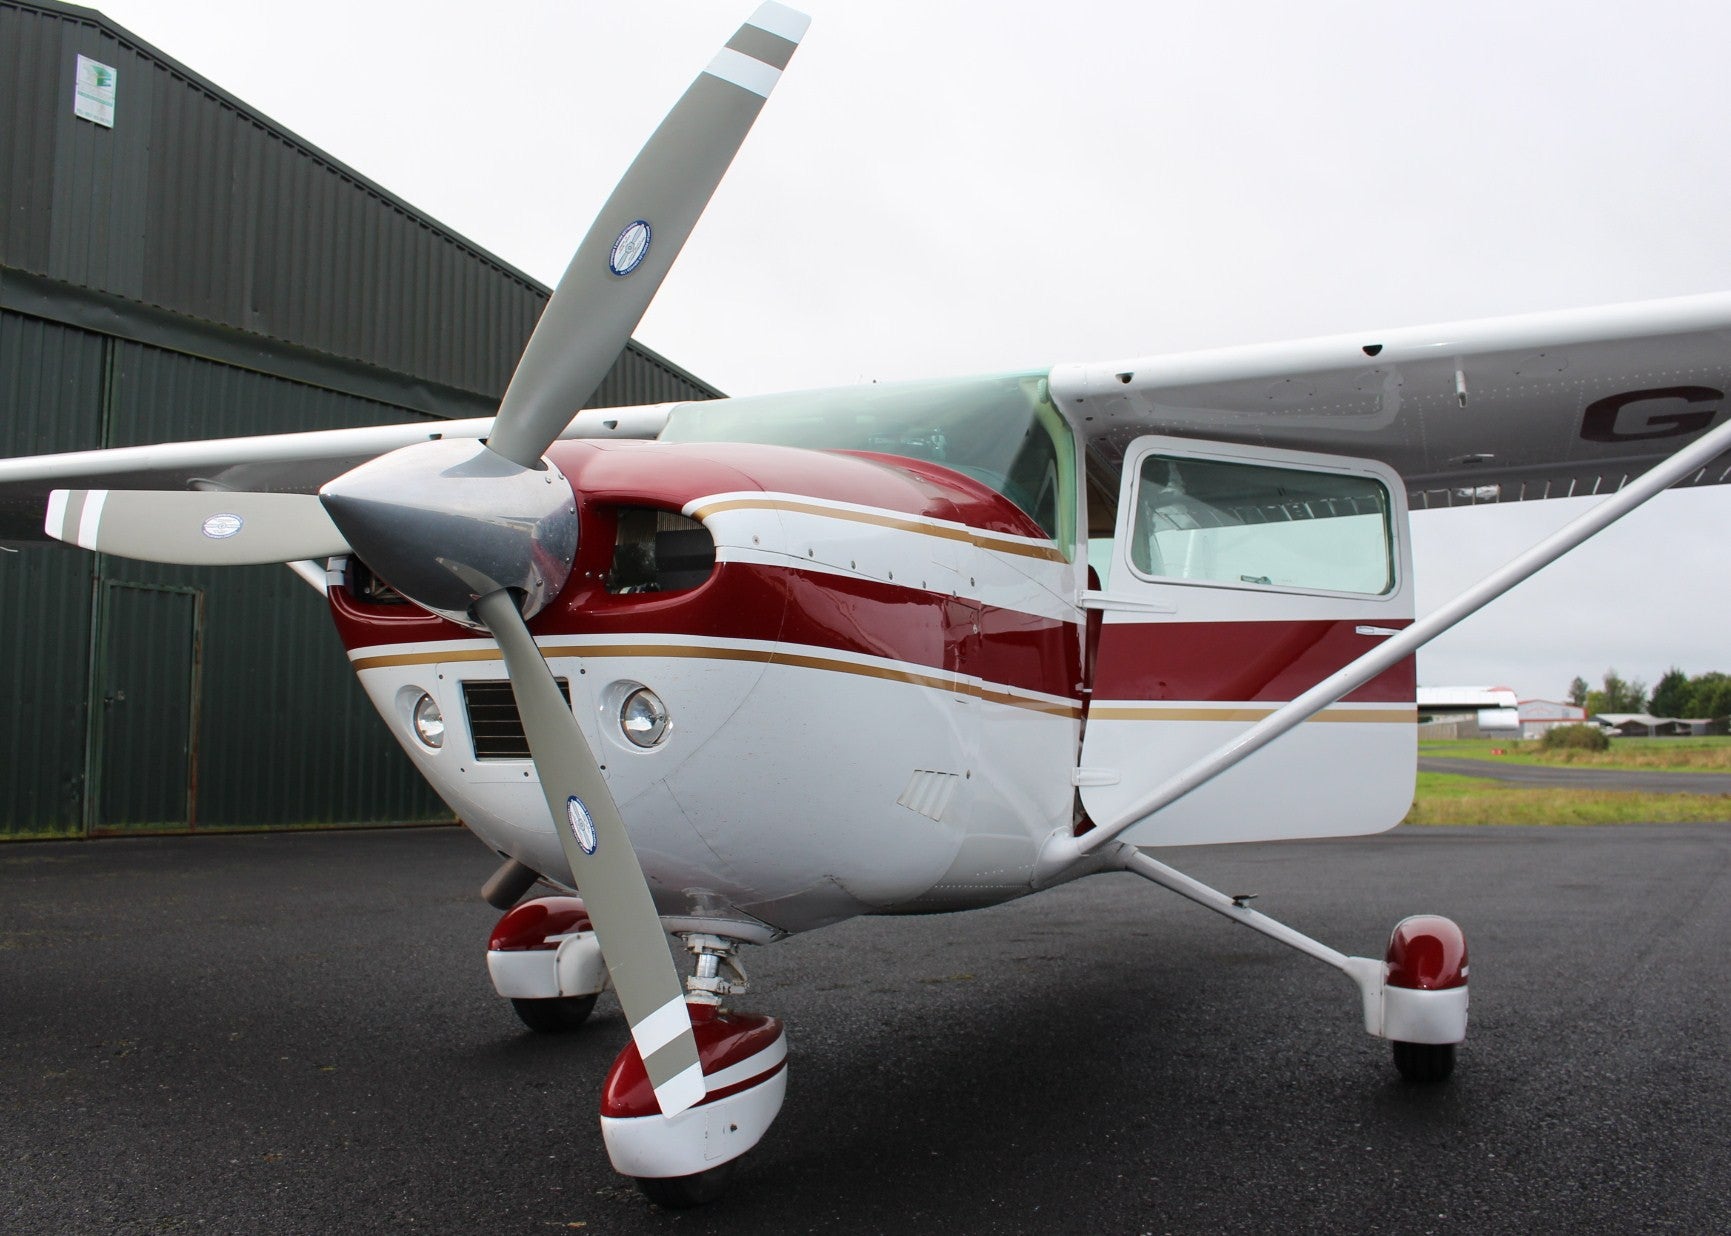 Buying an Aircraft - What do we look for?